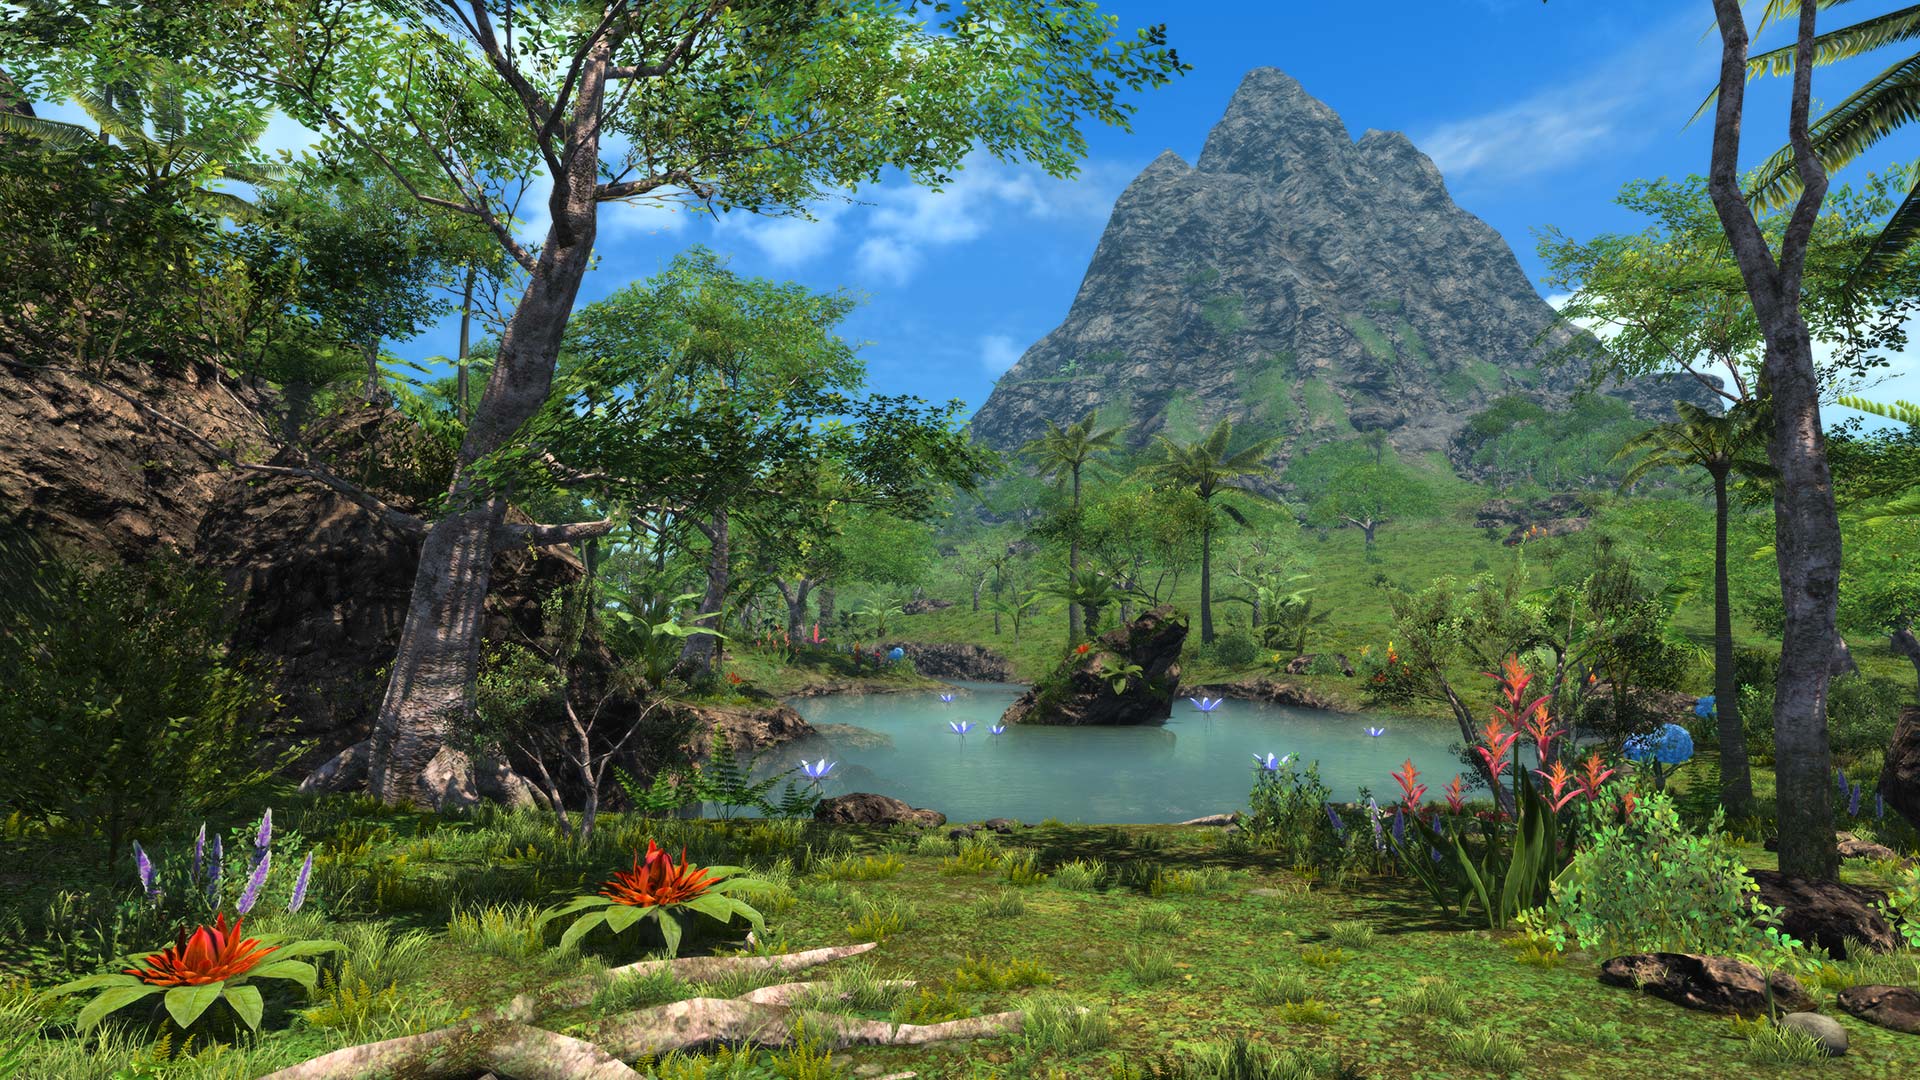 Final Fantasy 14's Island Sanctuary update will arrive on August 23rd